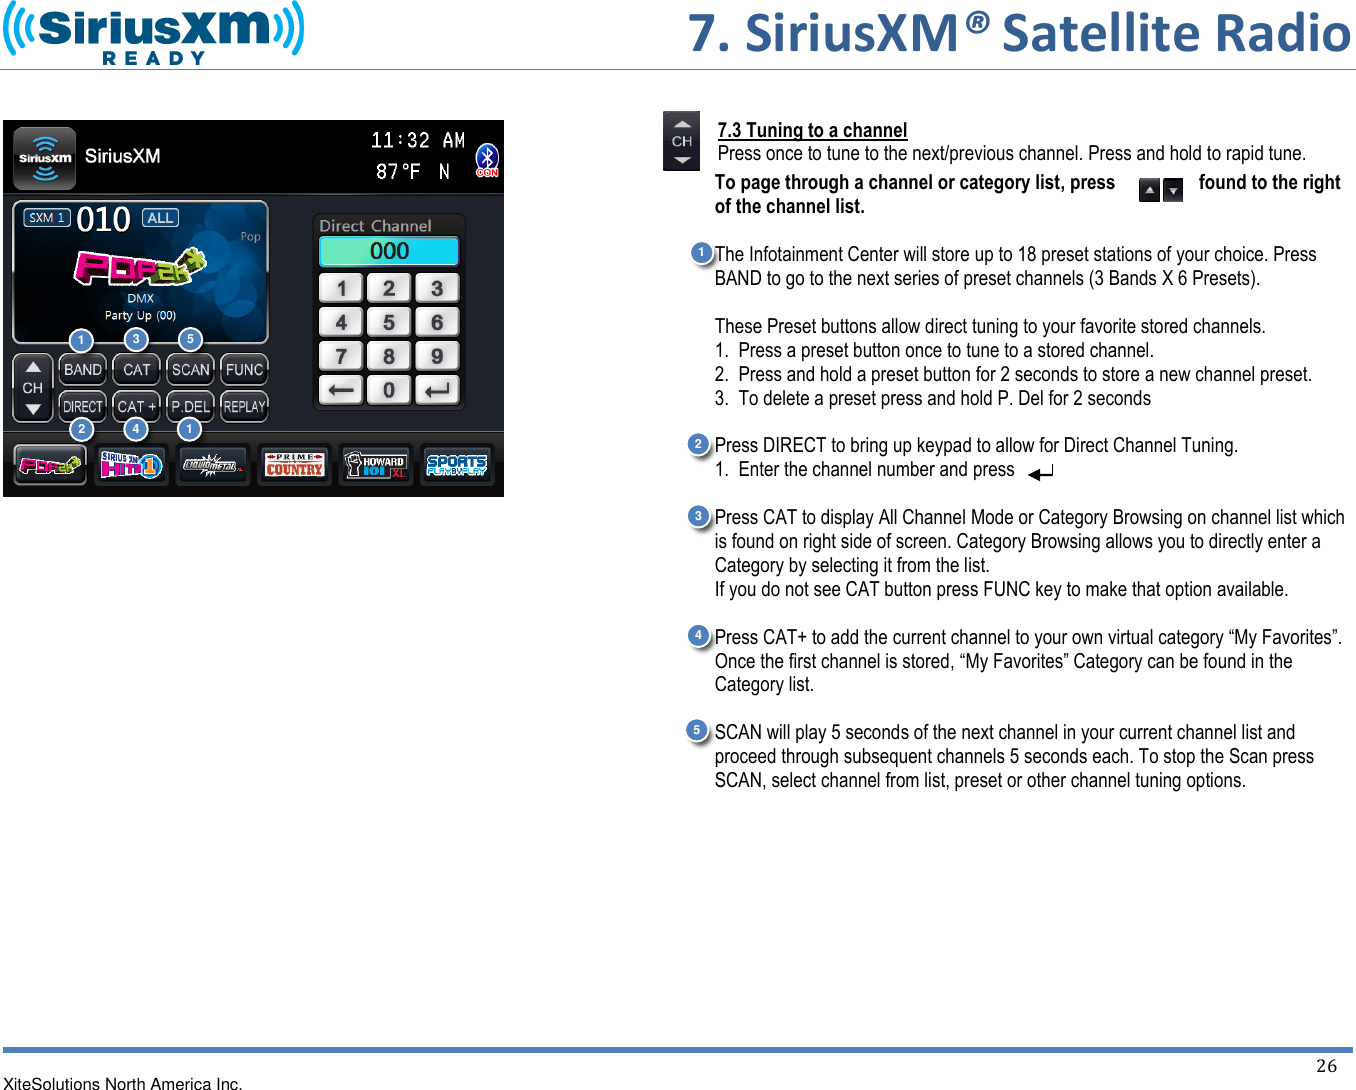      7. SiriusXM® Satellite Radio   XiteSolutions North America Inc.  26                            7.3 Tuning to a channel Press once to tune to the next/previous channel. Press and hold to rapid tune. To page through a channel or category list, press  found to the right of the channel list.  The Infotainment Center will store up to 18 preset stations of your choice. Press BAND to go to the next series of preset channels (3 Bands X 6 Presets).  These Preset buttons allow direct tuning to your favorite stored channels.  1.  Press a preset button once to tune to a stored channel.  2.  Press and hold a preset button for 2 seconds to store a new channel preset. 3.  To delete a preset press and hold P. Del for 2 seconds  Press DIRECT to bring up keypad to allow for Direct Channel Tuning.   1.  Enter the channel number and press   Press CAT to display All Channel Mode or Category Browsing on channel list which is found on right side of screen. Category Browsing allows you to directly enter a Category by selecting it from the list. If you do not see CAT button press FUNC key to make that option available.  Press CAT+ to add the current channel to your own virtual category “My Favorites”. Once the first channel is stored, “My Favorites” Category can be found in the Category list.   SCAN will play 5 seconds of the next channel in your current channel list and proceed through subsequent channels 5 seconds each. To stop the Scan press SCAN, select channel from list, preset or other channel tuning options.     1 1 2 2 3 3 4 4 5 5 1 